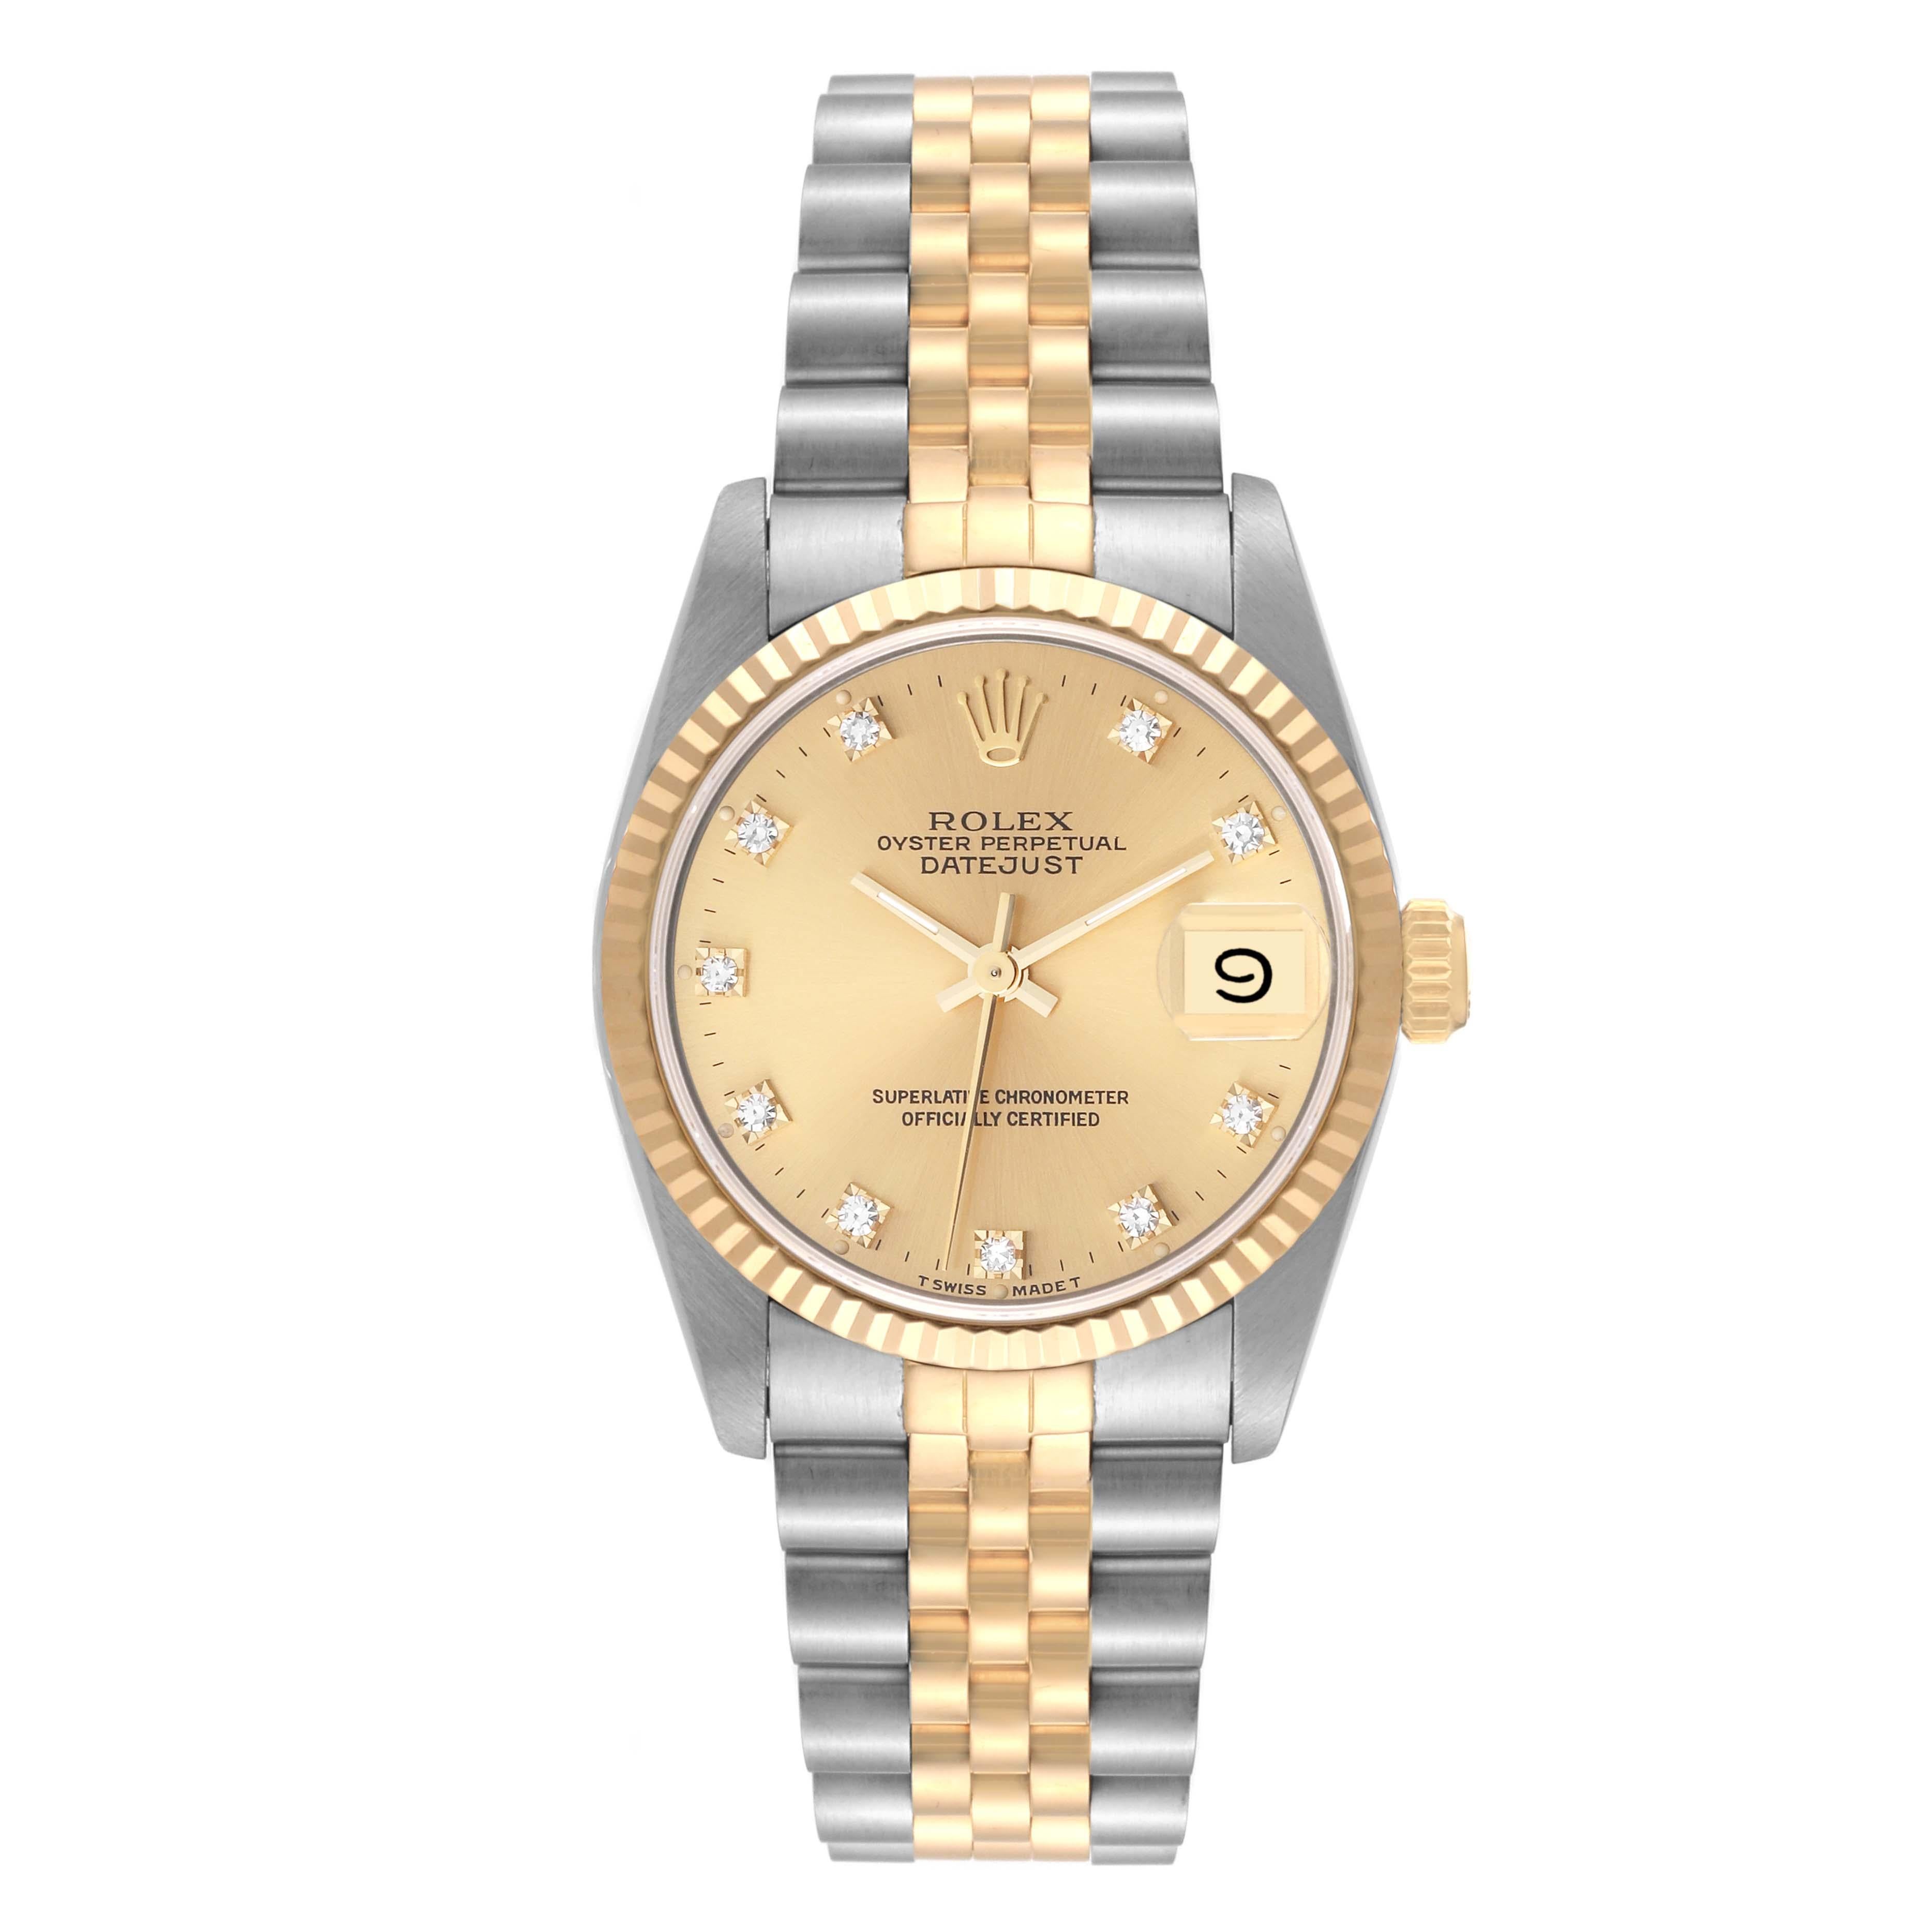 Rolex Datejust Midsize Diamond Dial Steel Yellow Gold Ladies Watch 68273. Officially certified chronometer automatic self-winding movement. Stainless steel oyster case 31 mm in diameter. Rolex logo on an 18k yellow gold crown. 18k yellow gold fluted